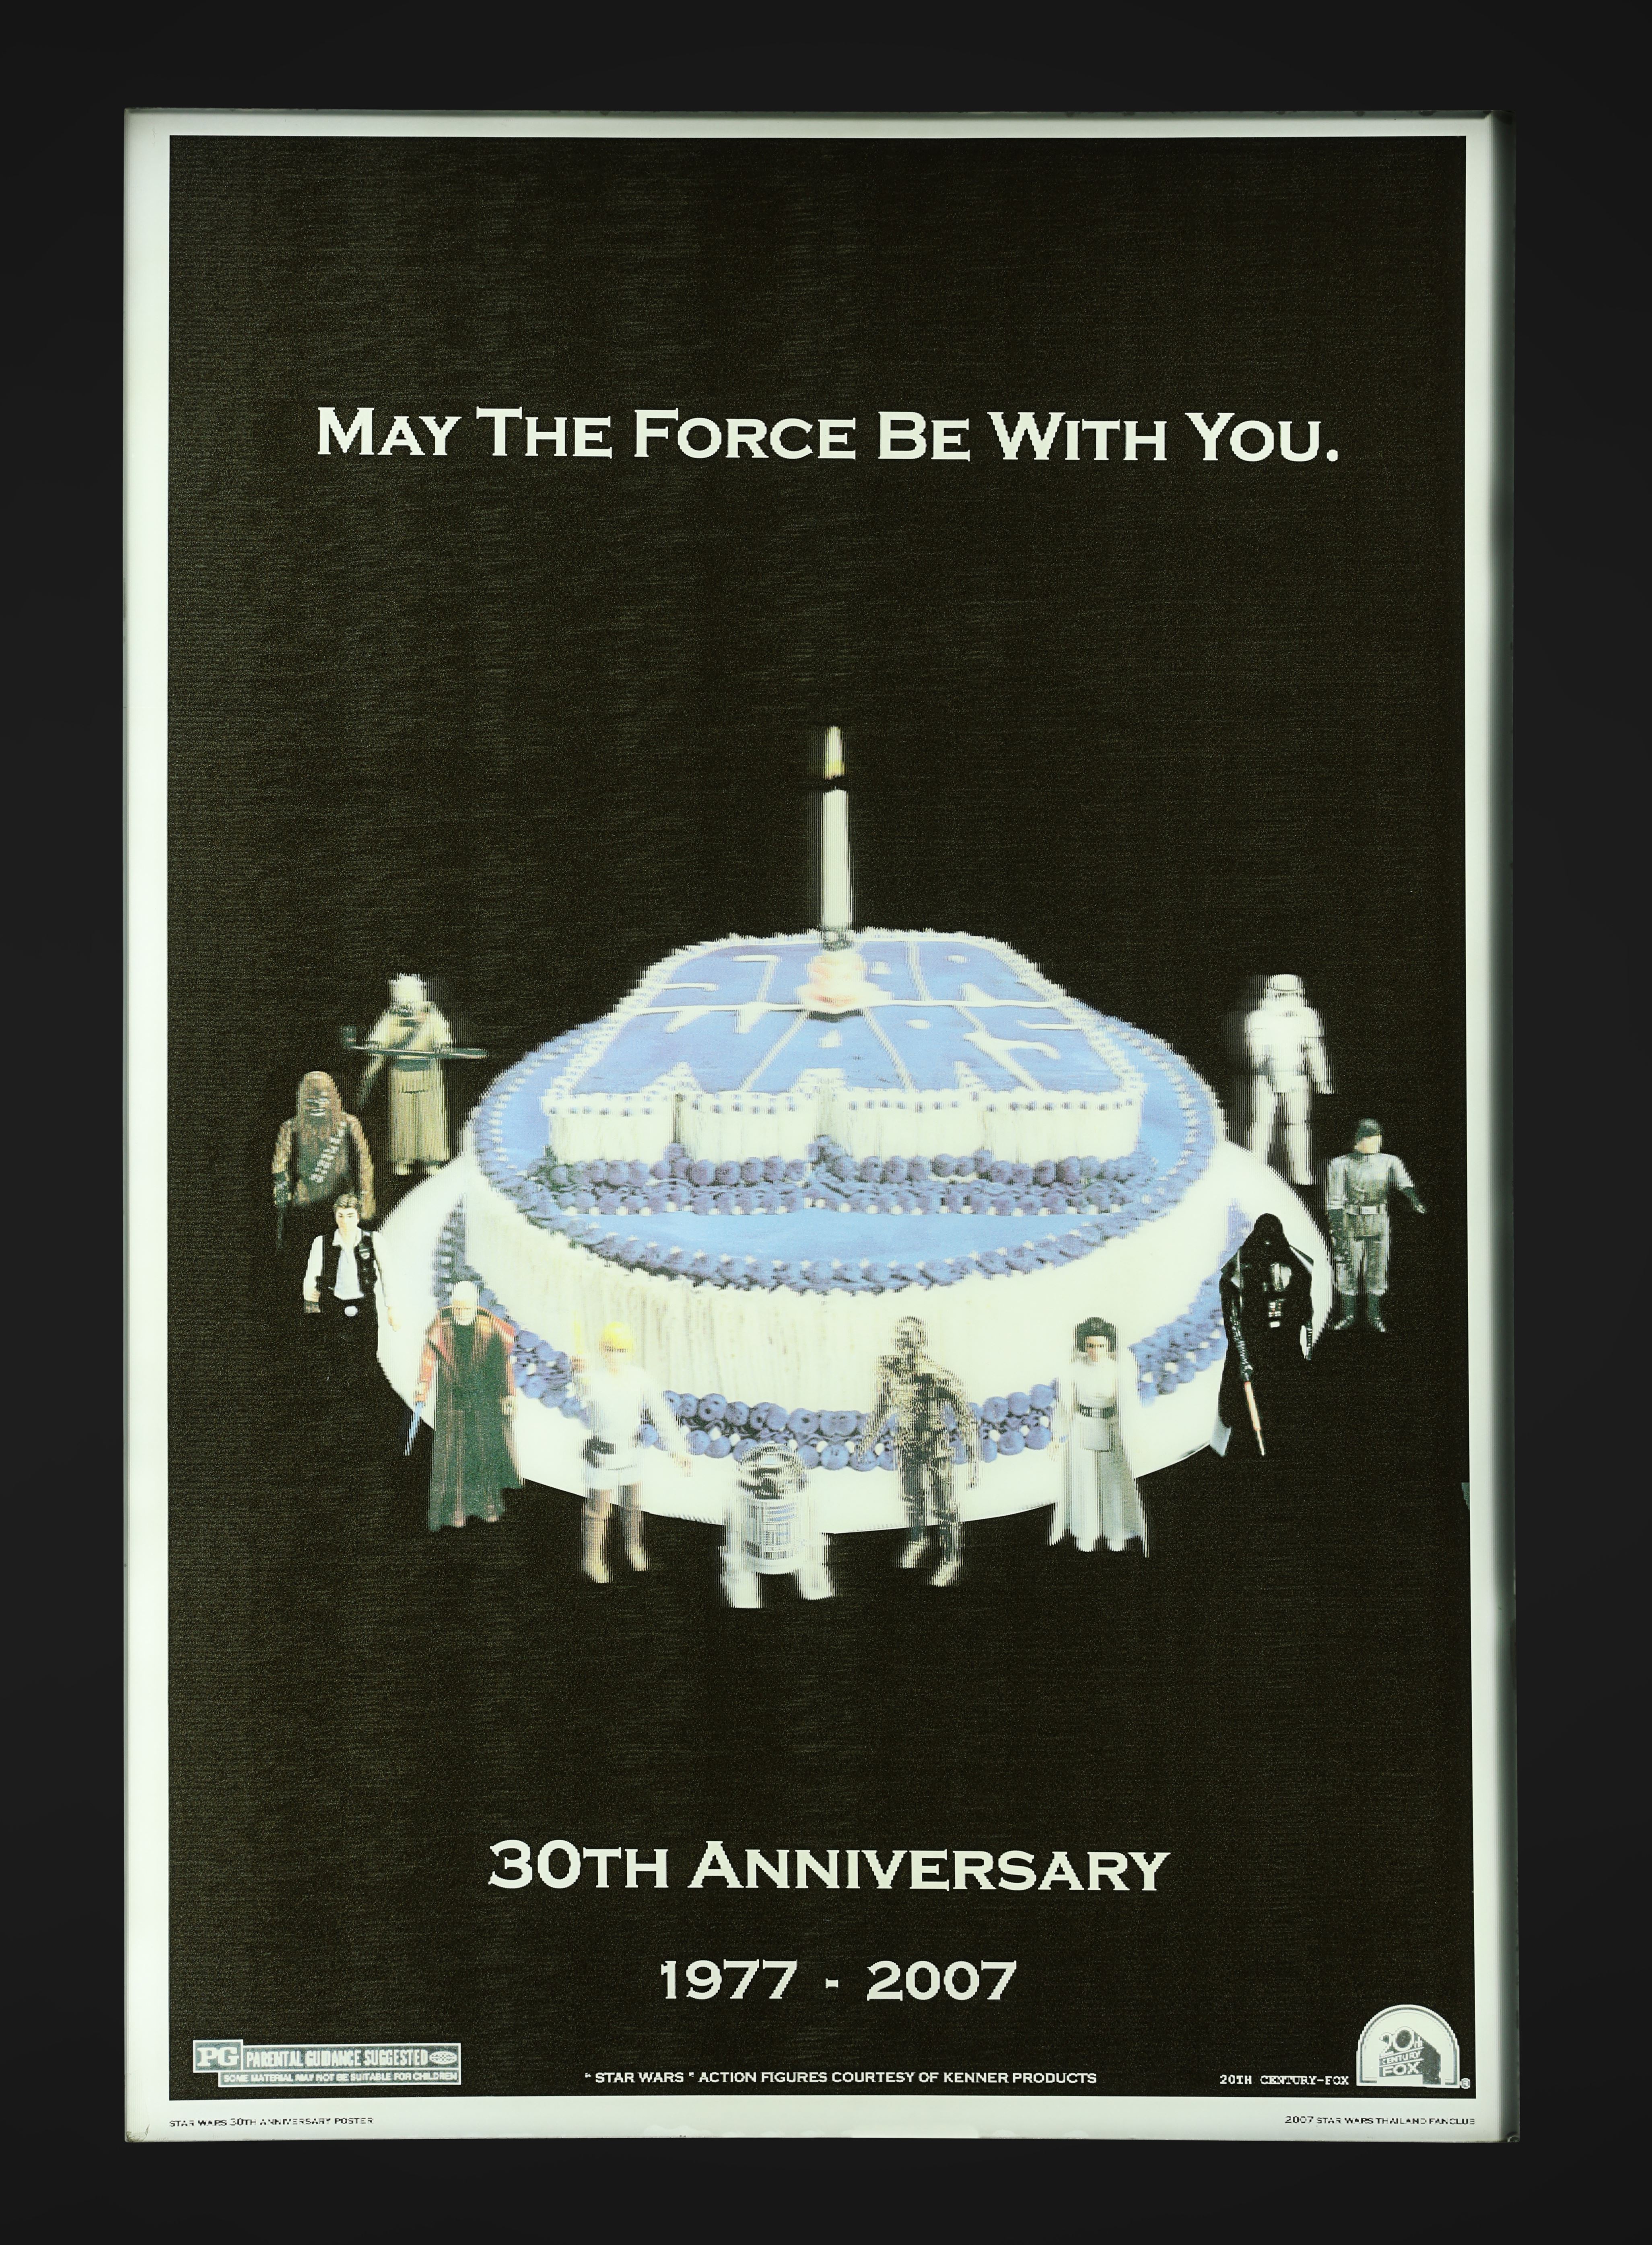 STAR WARS: A NEW HOPE (1977) - David Frangioni Collection: 30th Anniversary Lenticular One-Sheet, 20